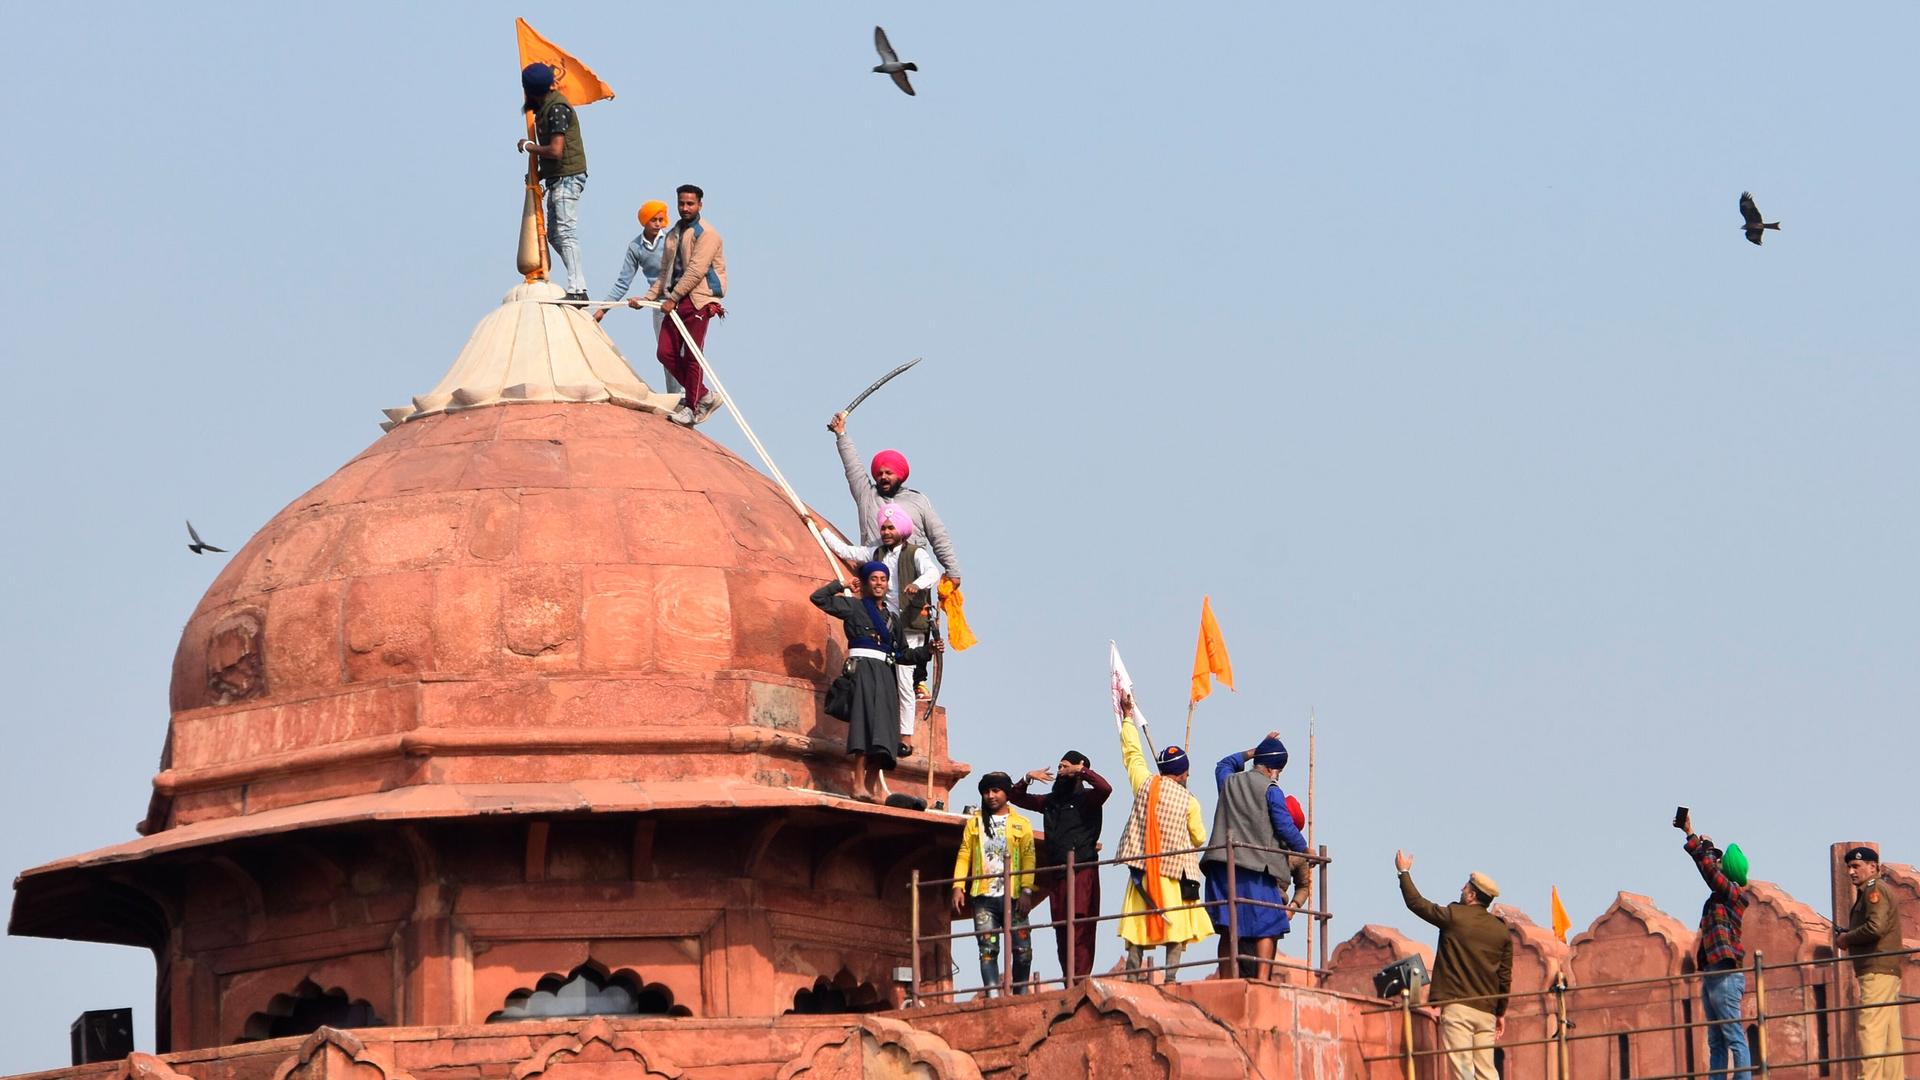 A group of men are shown on top of the redish-orange colored Red Fort monument with one man putting up an orange flag on top.